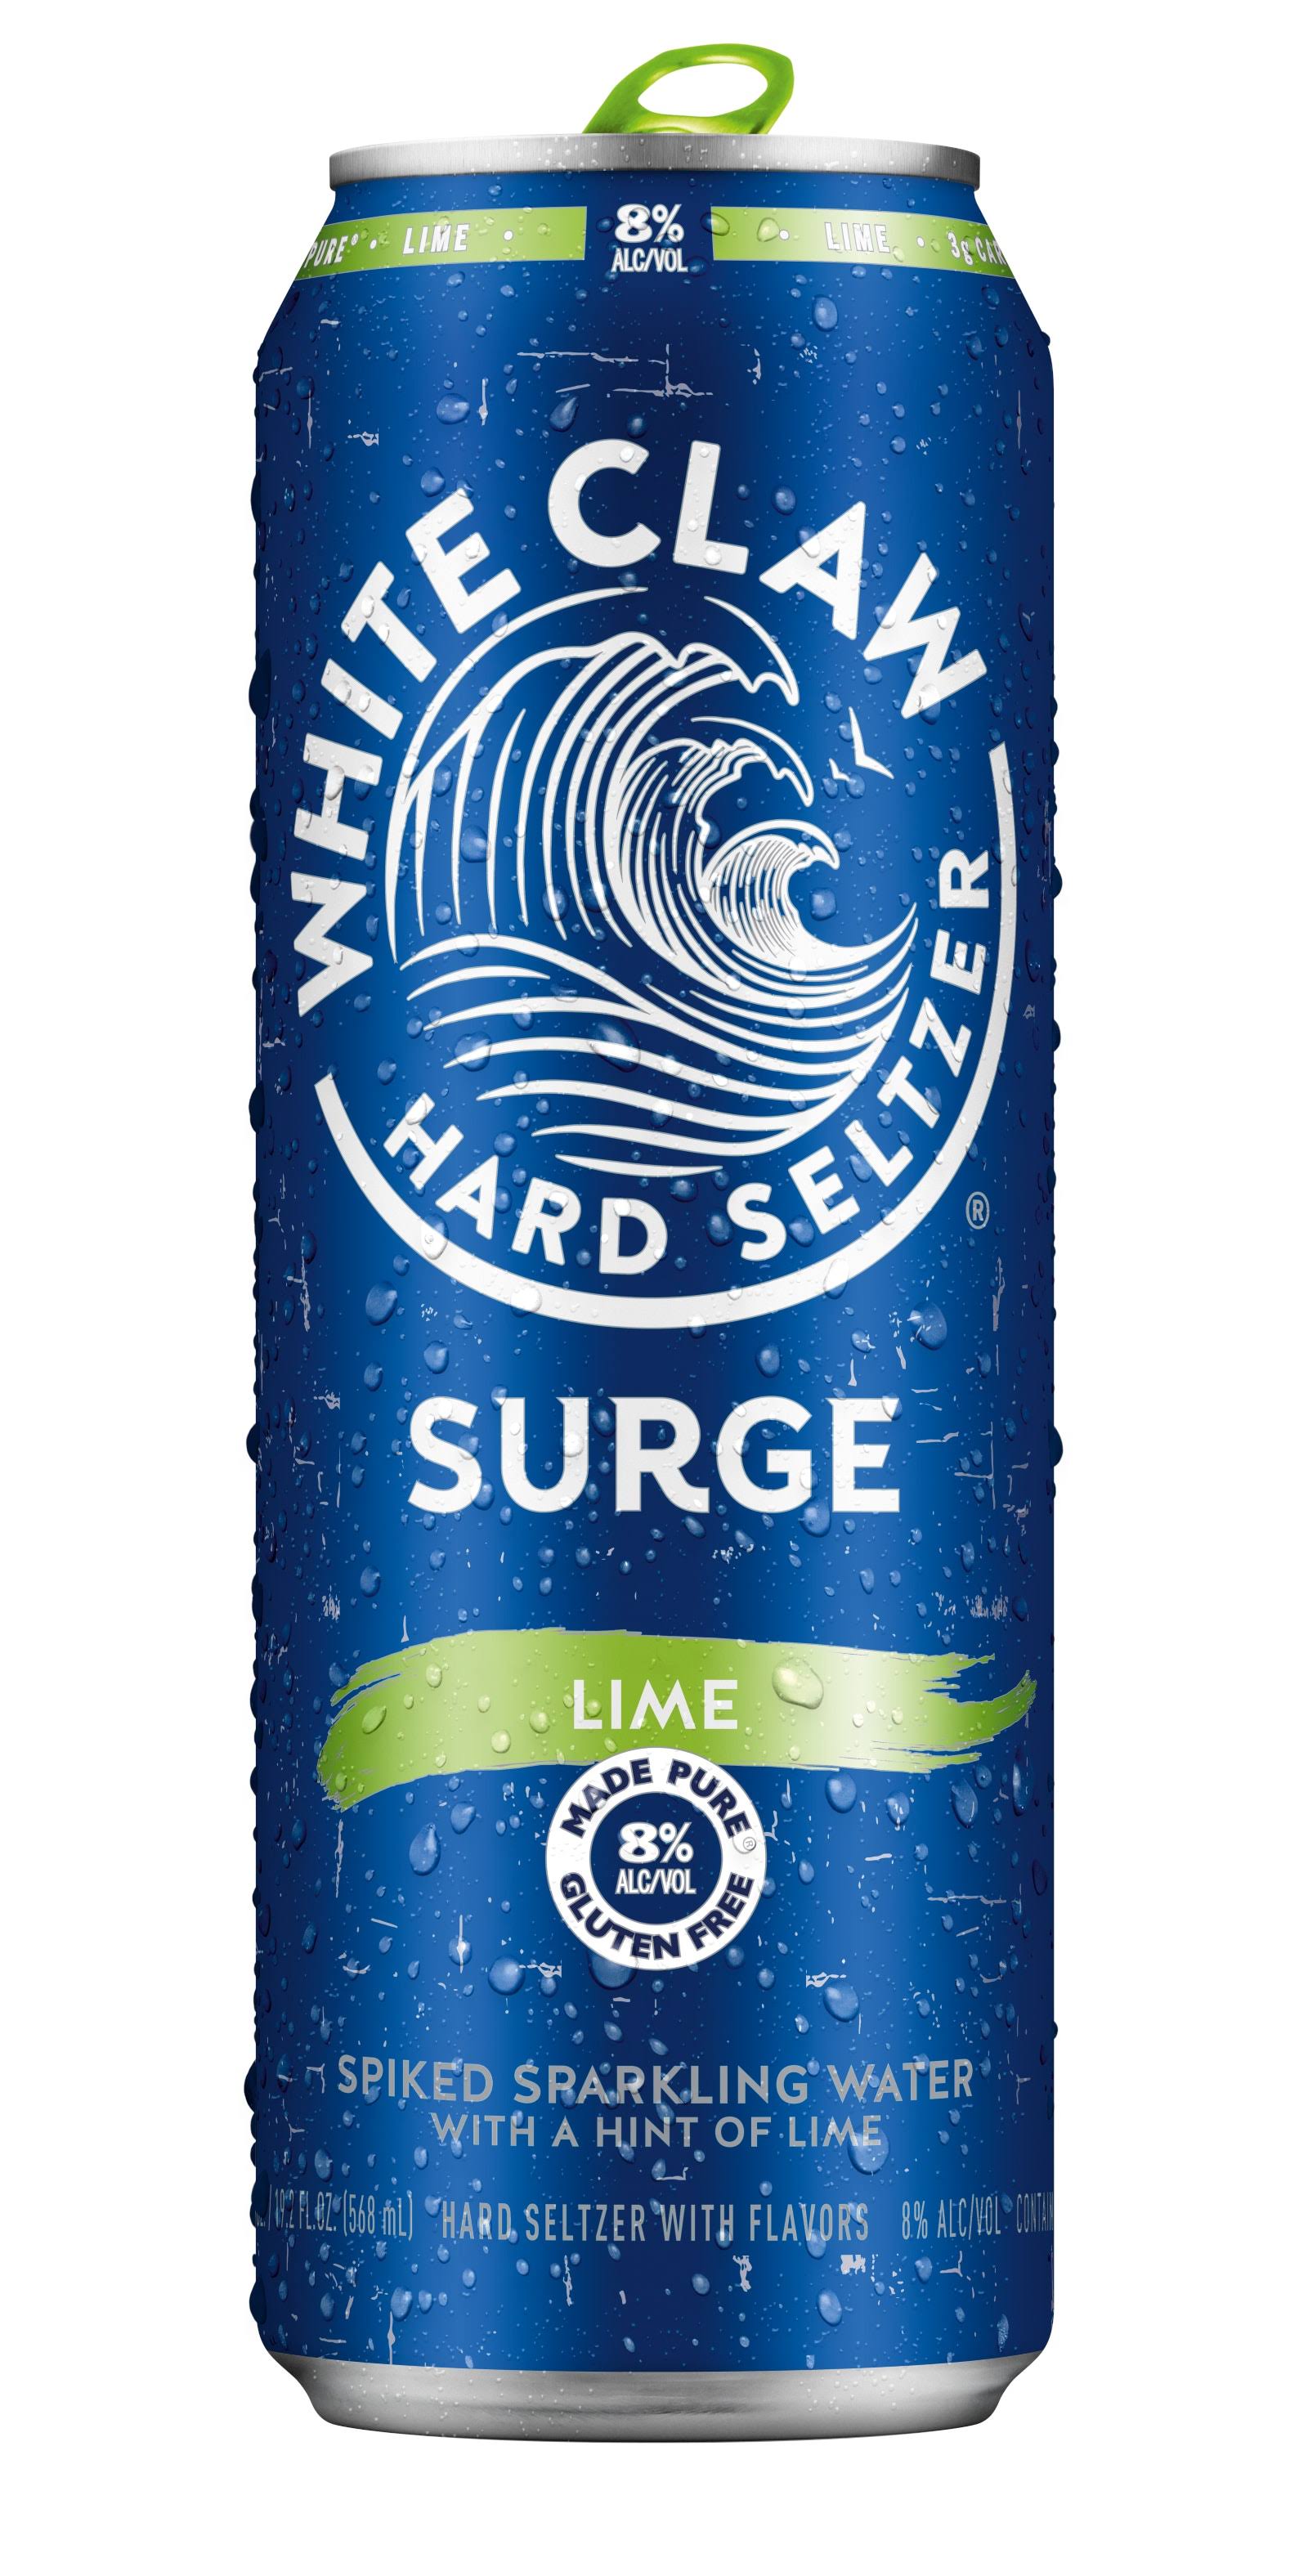 White Claw Hard Seltzer Surge Lime (19.2oz can)